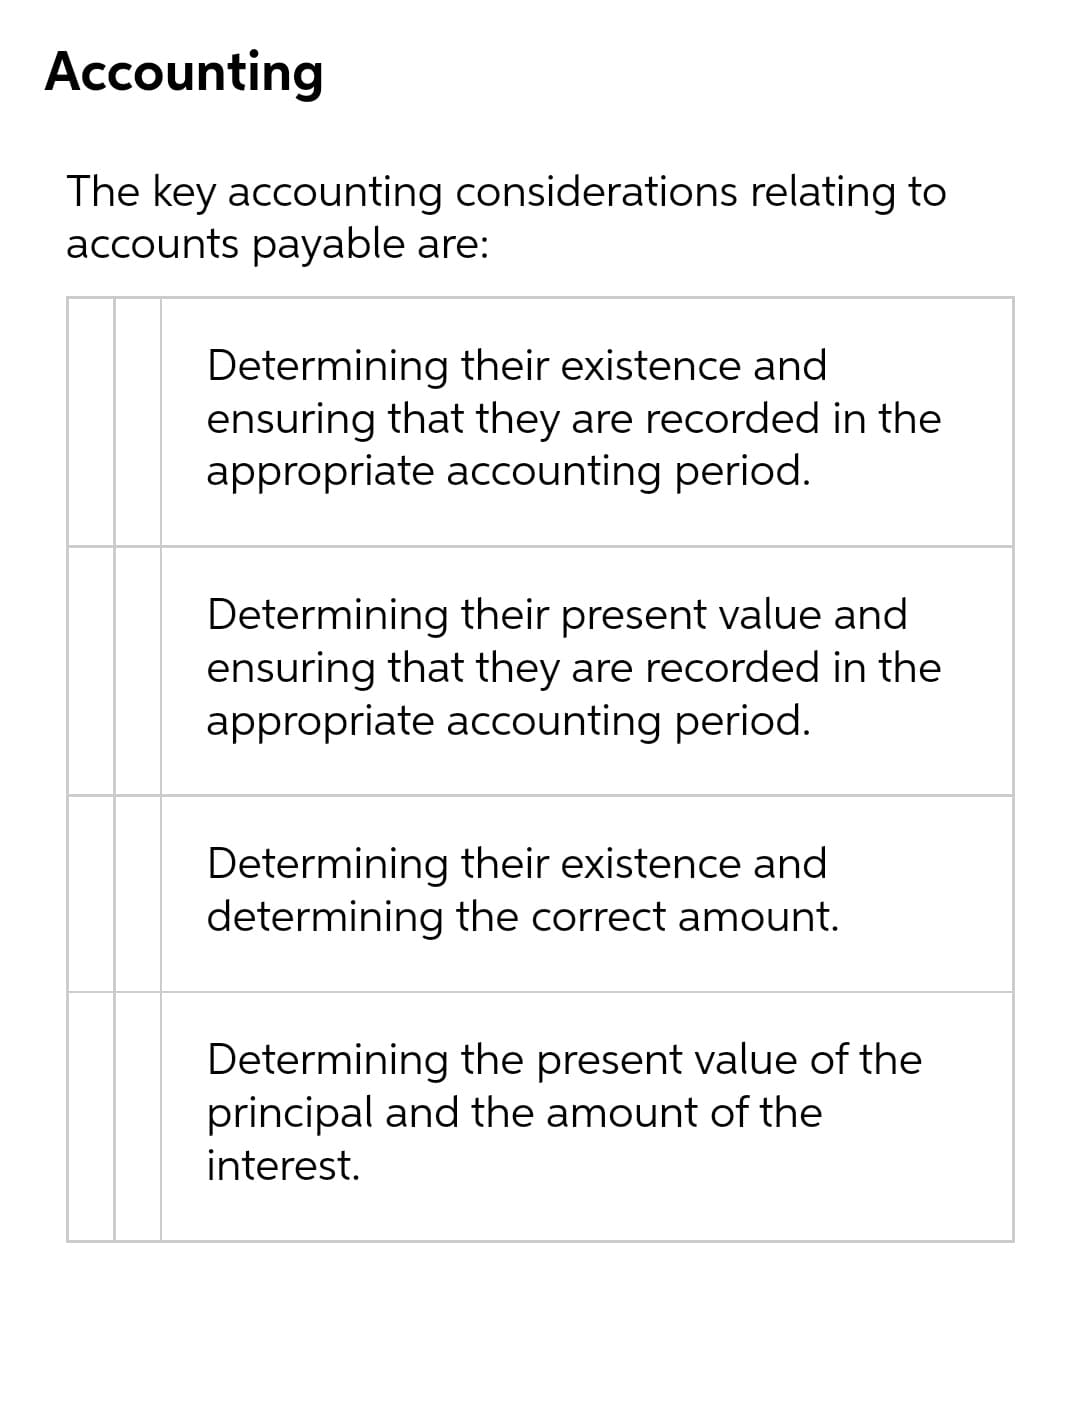 Accounting
The key accounting considerations relating to
accounts payable are:
Determining their existence and
ensuring that they are recorded in the
appropriate accounting period.
Determining their present value and
ensuring that they are recorded in the
appropriate accounting period.
Determining their existence and
determining the correct amount.
Determining the present value of the
principal and the amount of the
interest.
